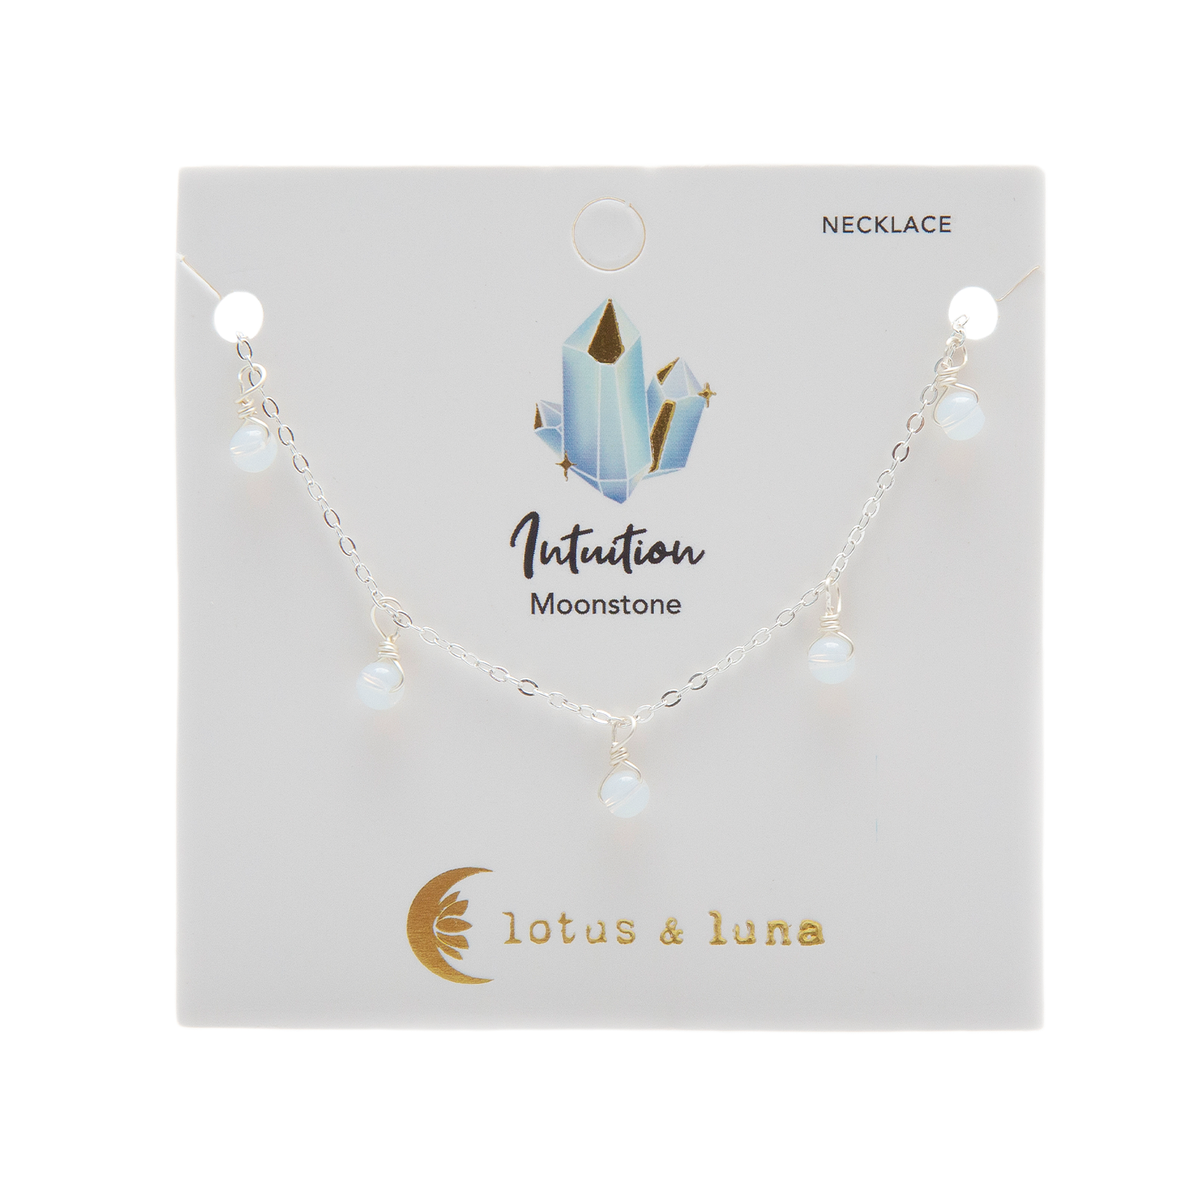 Moonstone dewdrop charm necklace on silver chain on packaging